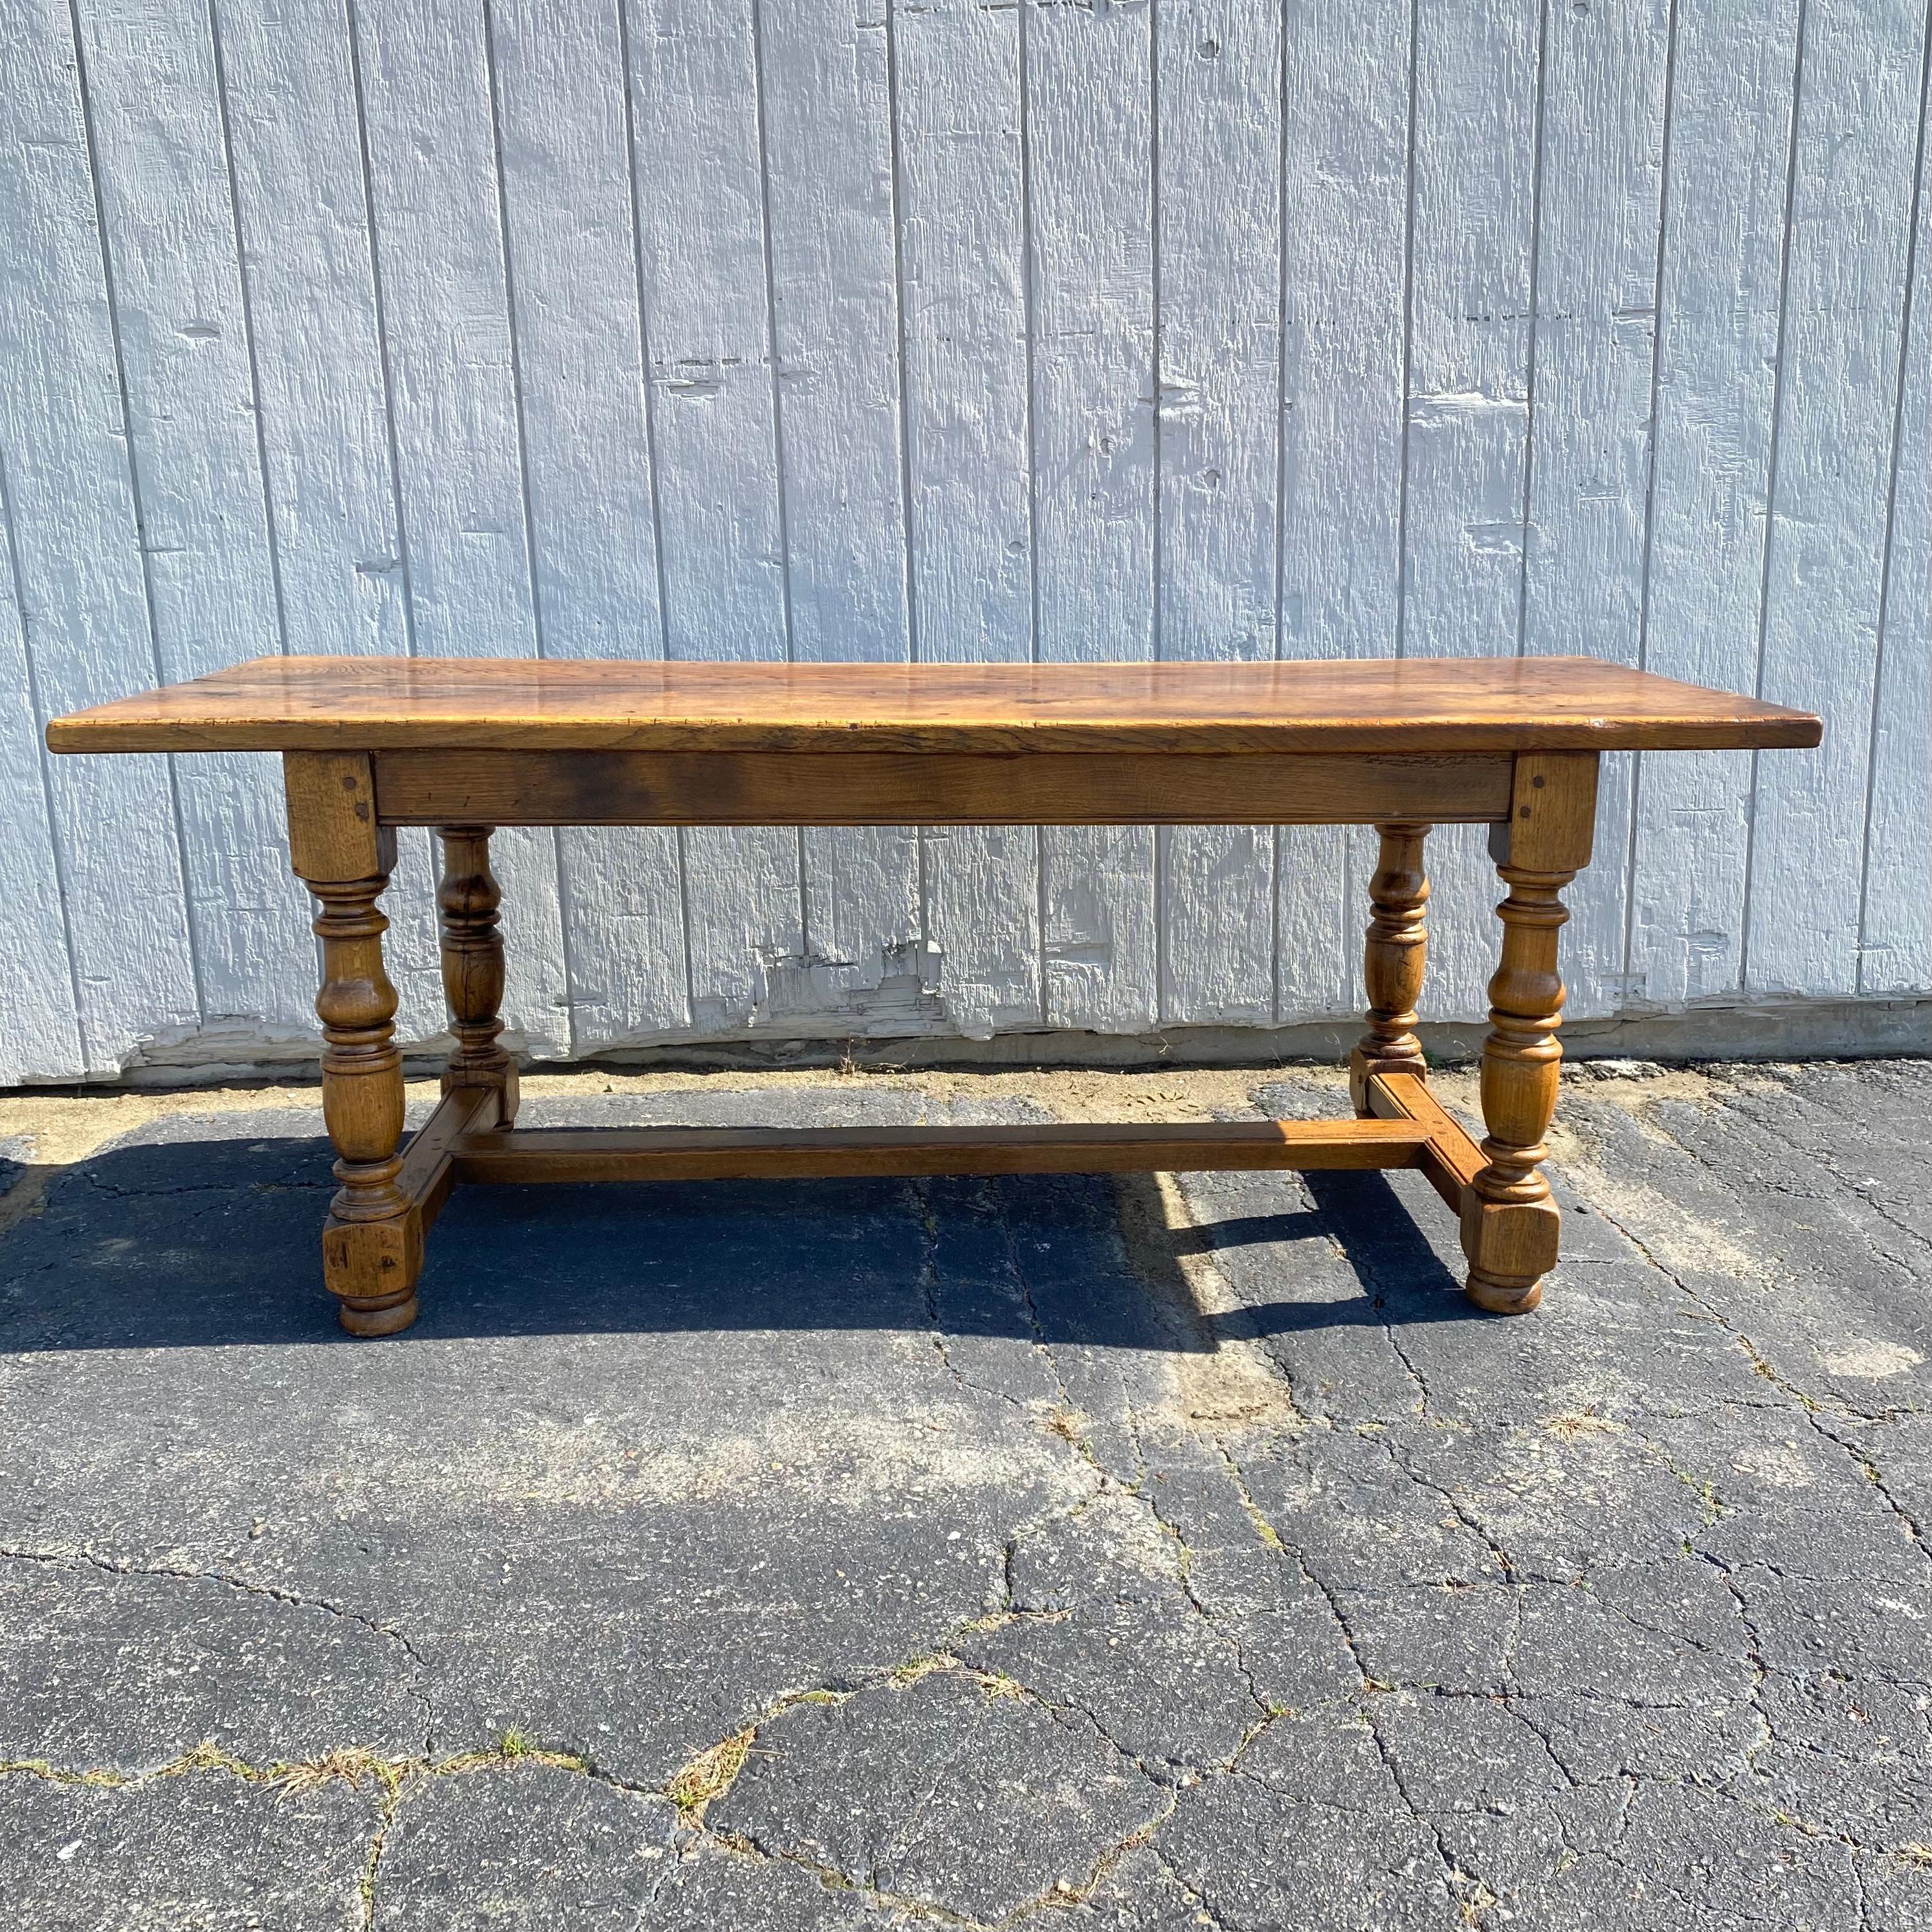 Classic country French Provincial farmhouse dining table or harvest table hand crafted from oak in the 19th century. The table features a thick plank top that is super solid. The trestle or refectory style table base has wood peg construction and